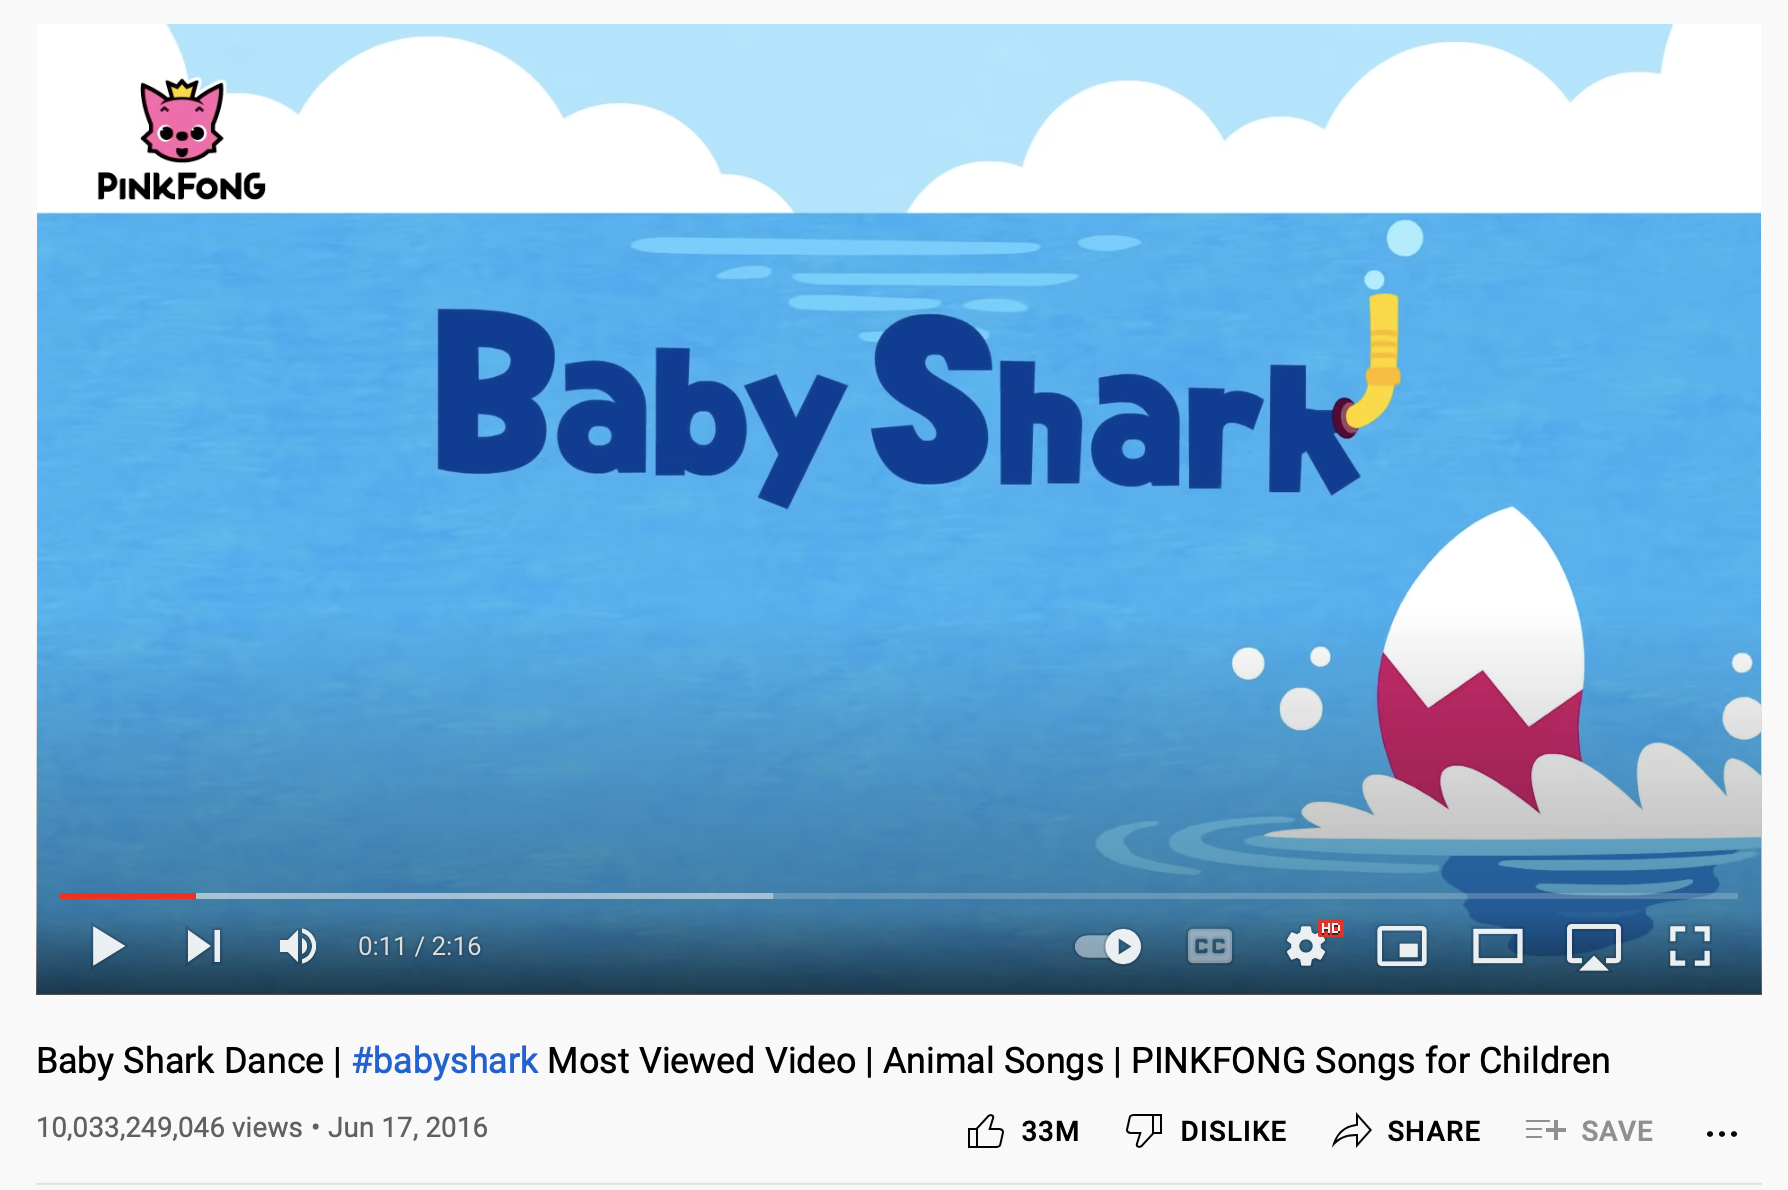 Baby Shark Becomes The First YouTube Video To Pass 10 Billion Views